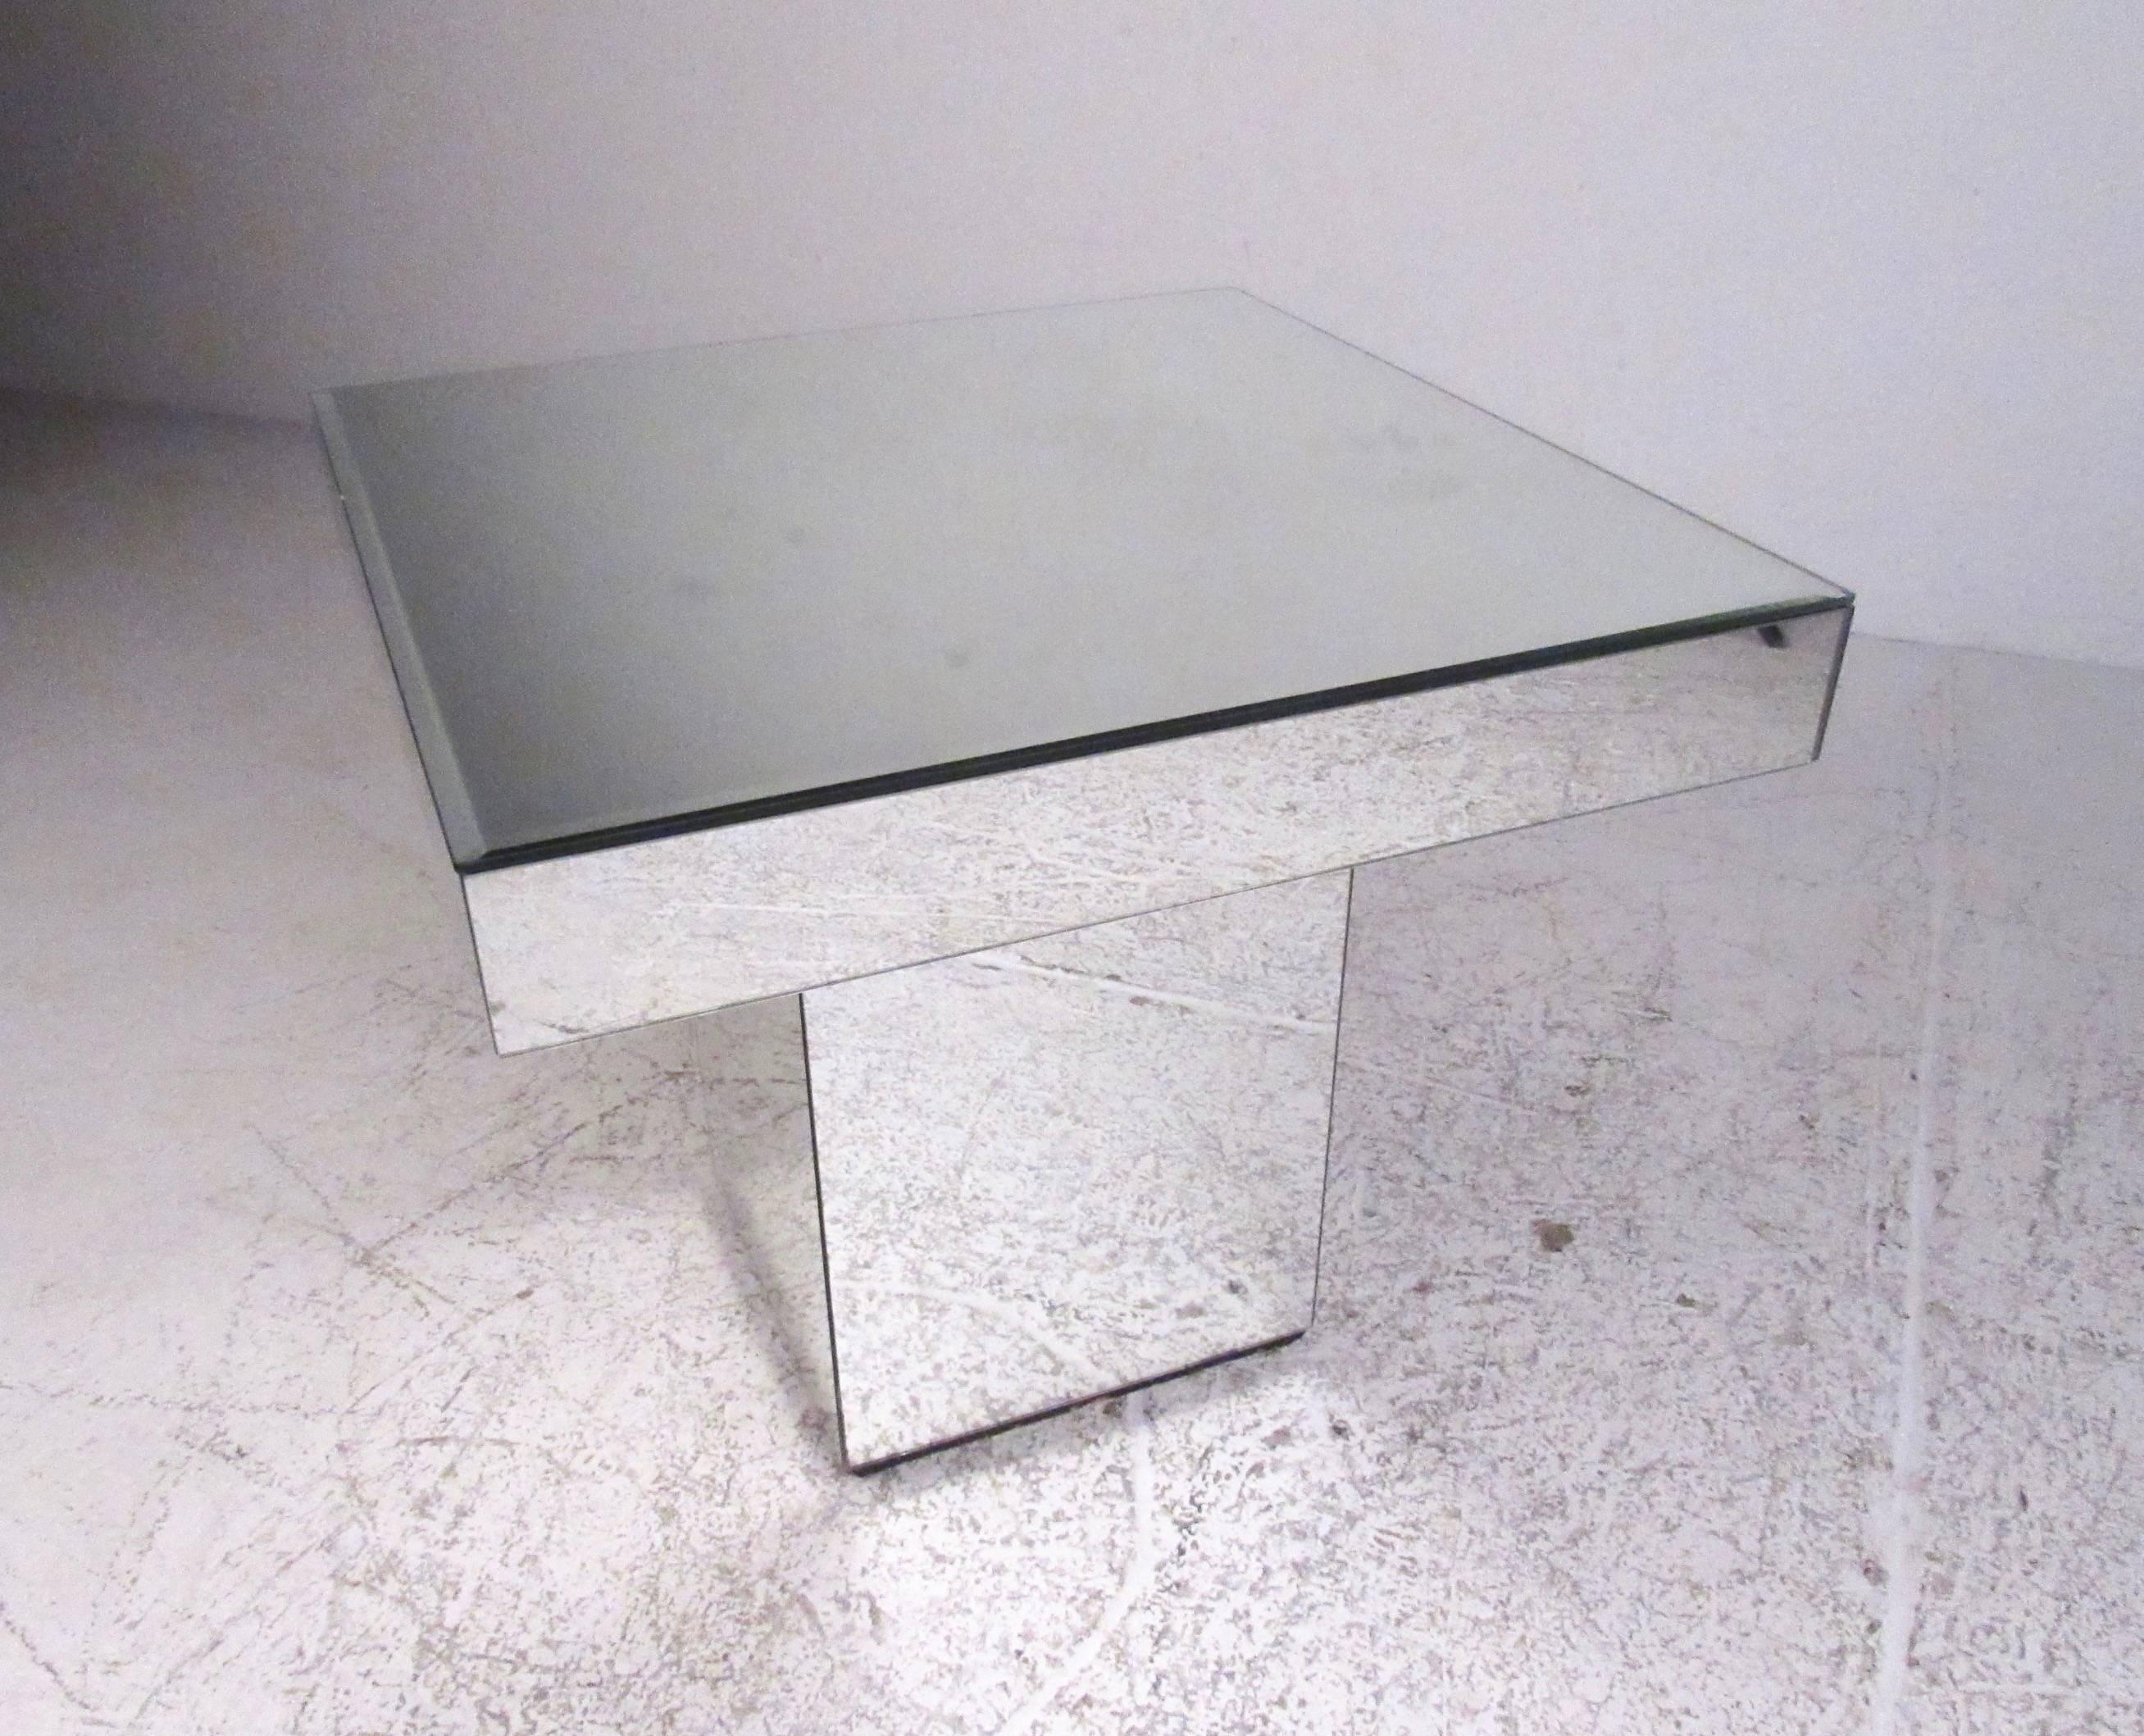 This vintage mirrored end table makes a stylish modern addition to any interior. Great lamp table or sofa side table makes this a versatile Mid-Century addition to any interior. Please confirm item location (NY or NJ).